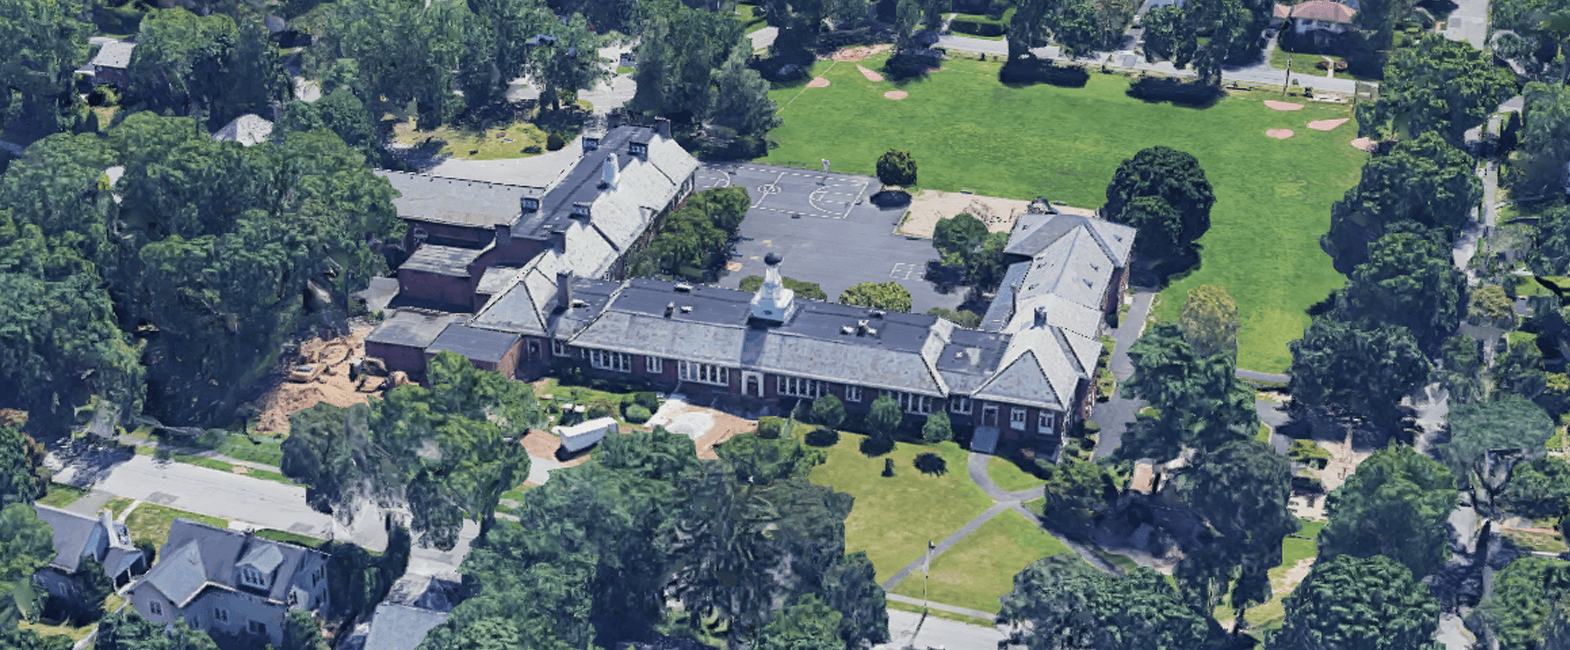 Search Real Estate Listings with Edgewood Elementary School District, part of the Scarsdale School District